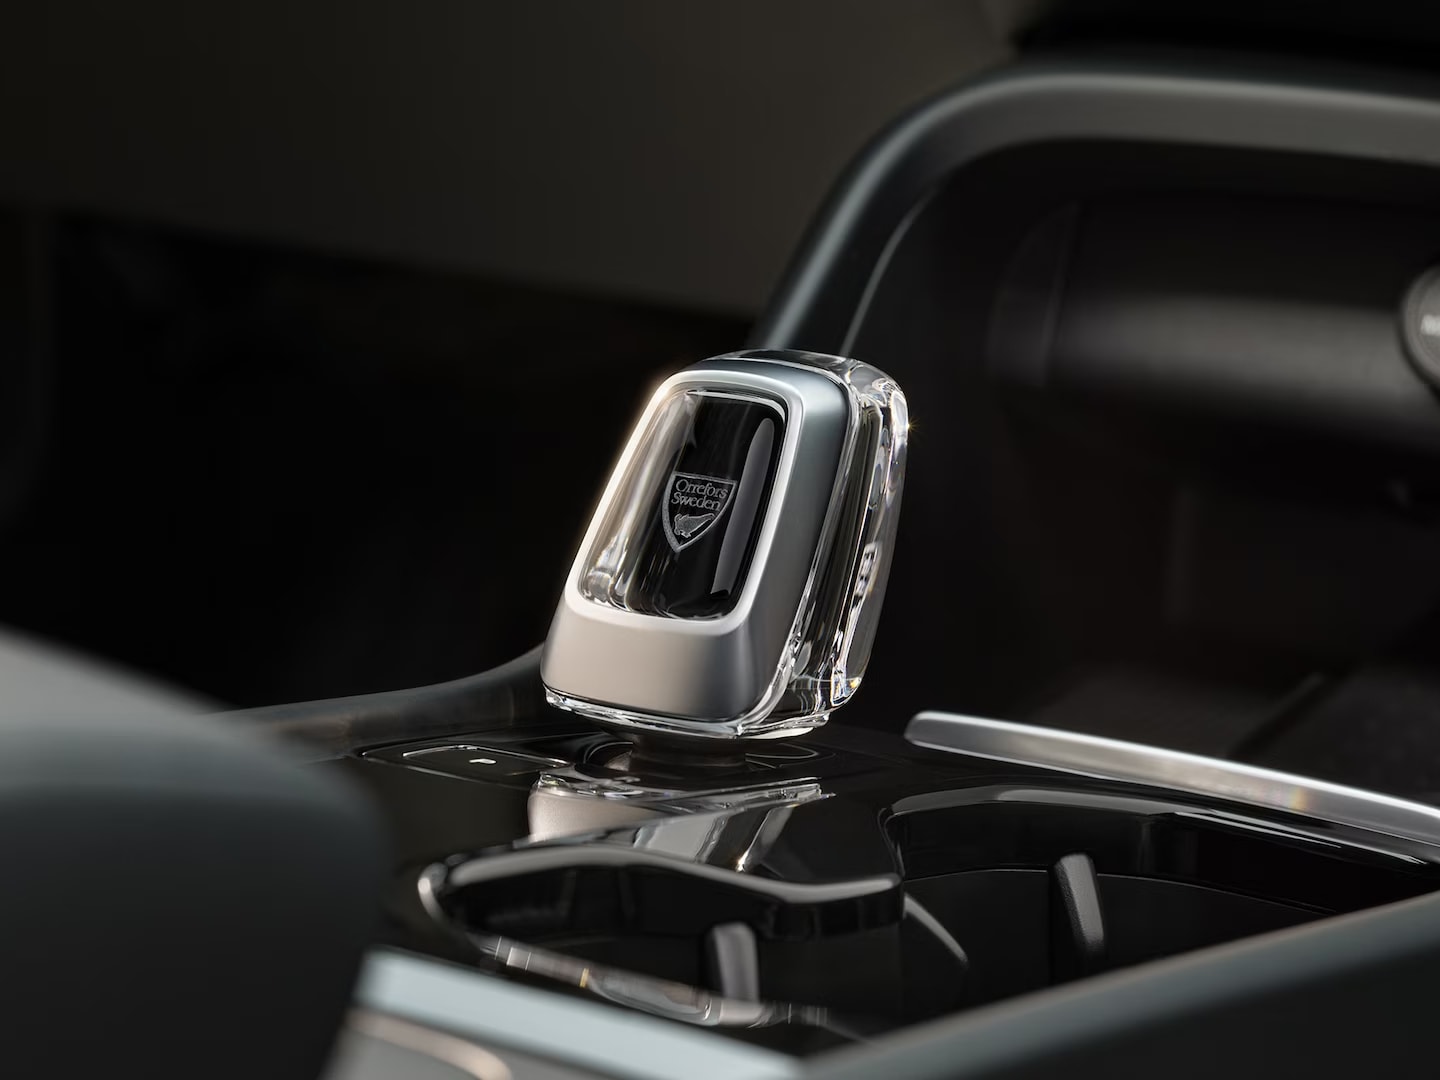 The Orrefors crystal gear shift in the fully electric Volvo EX40.